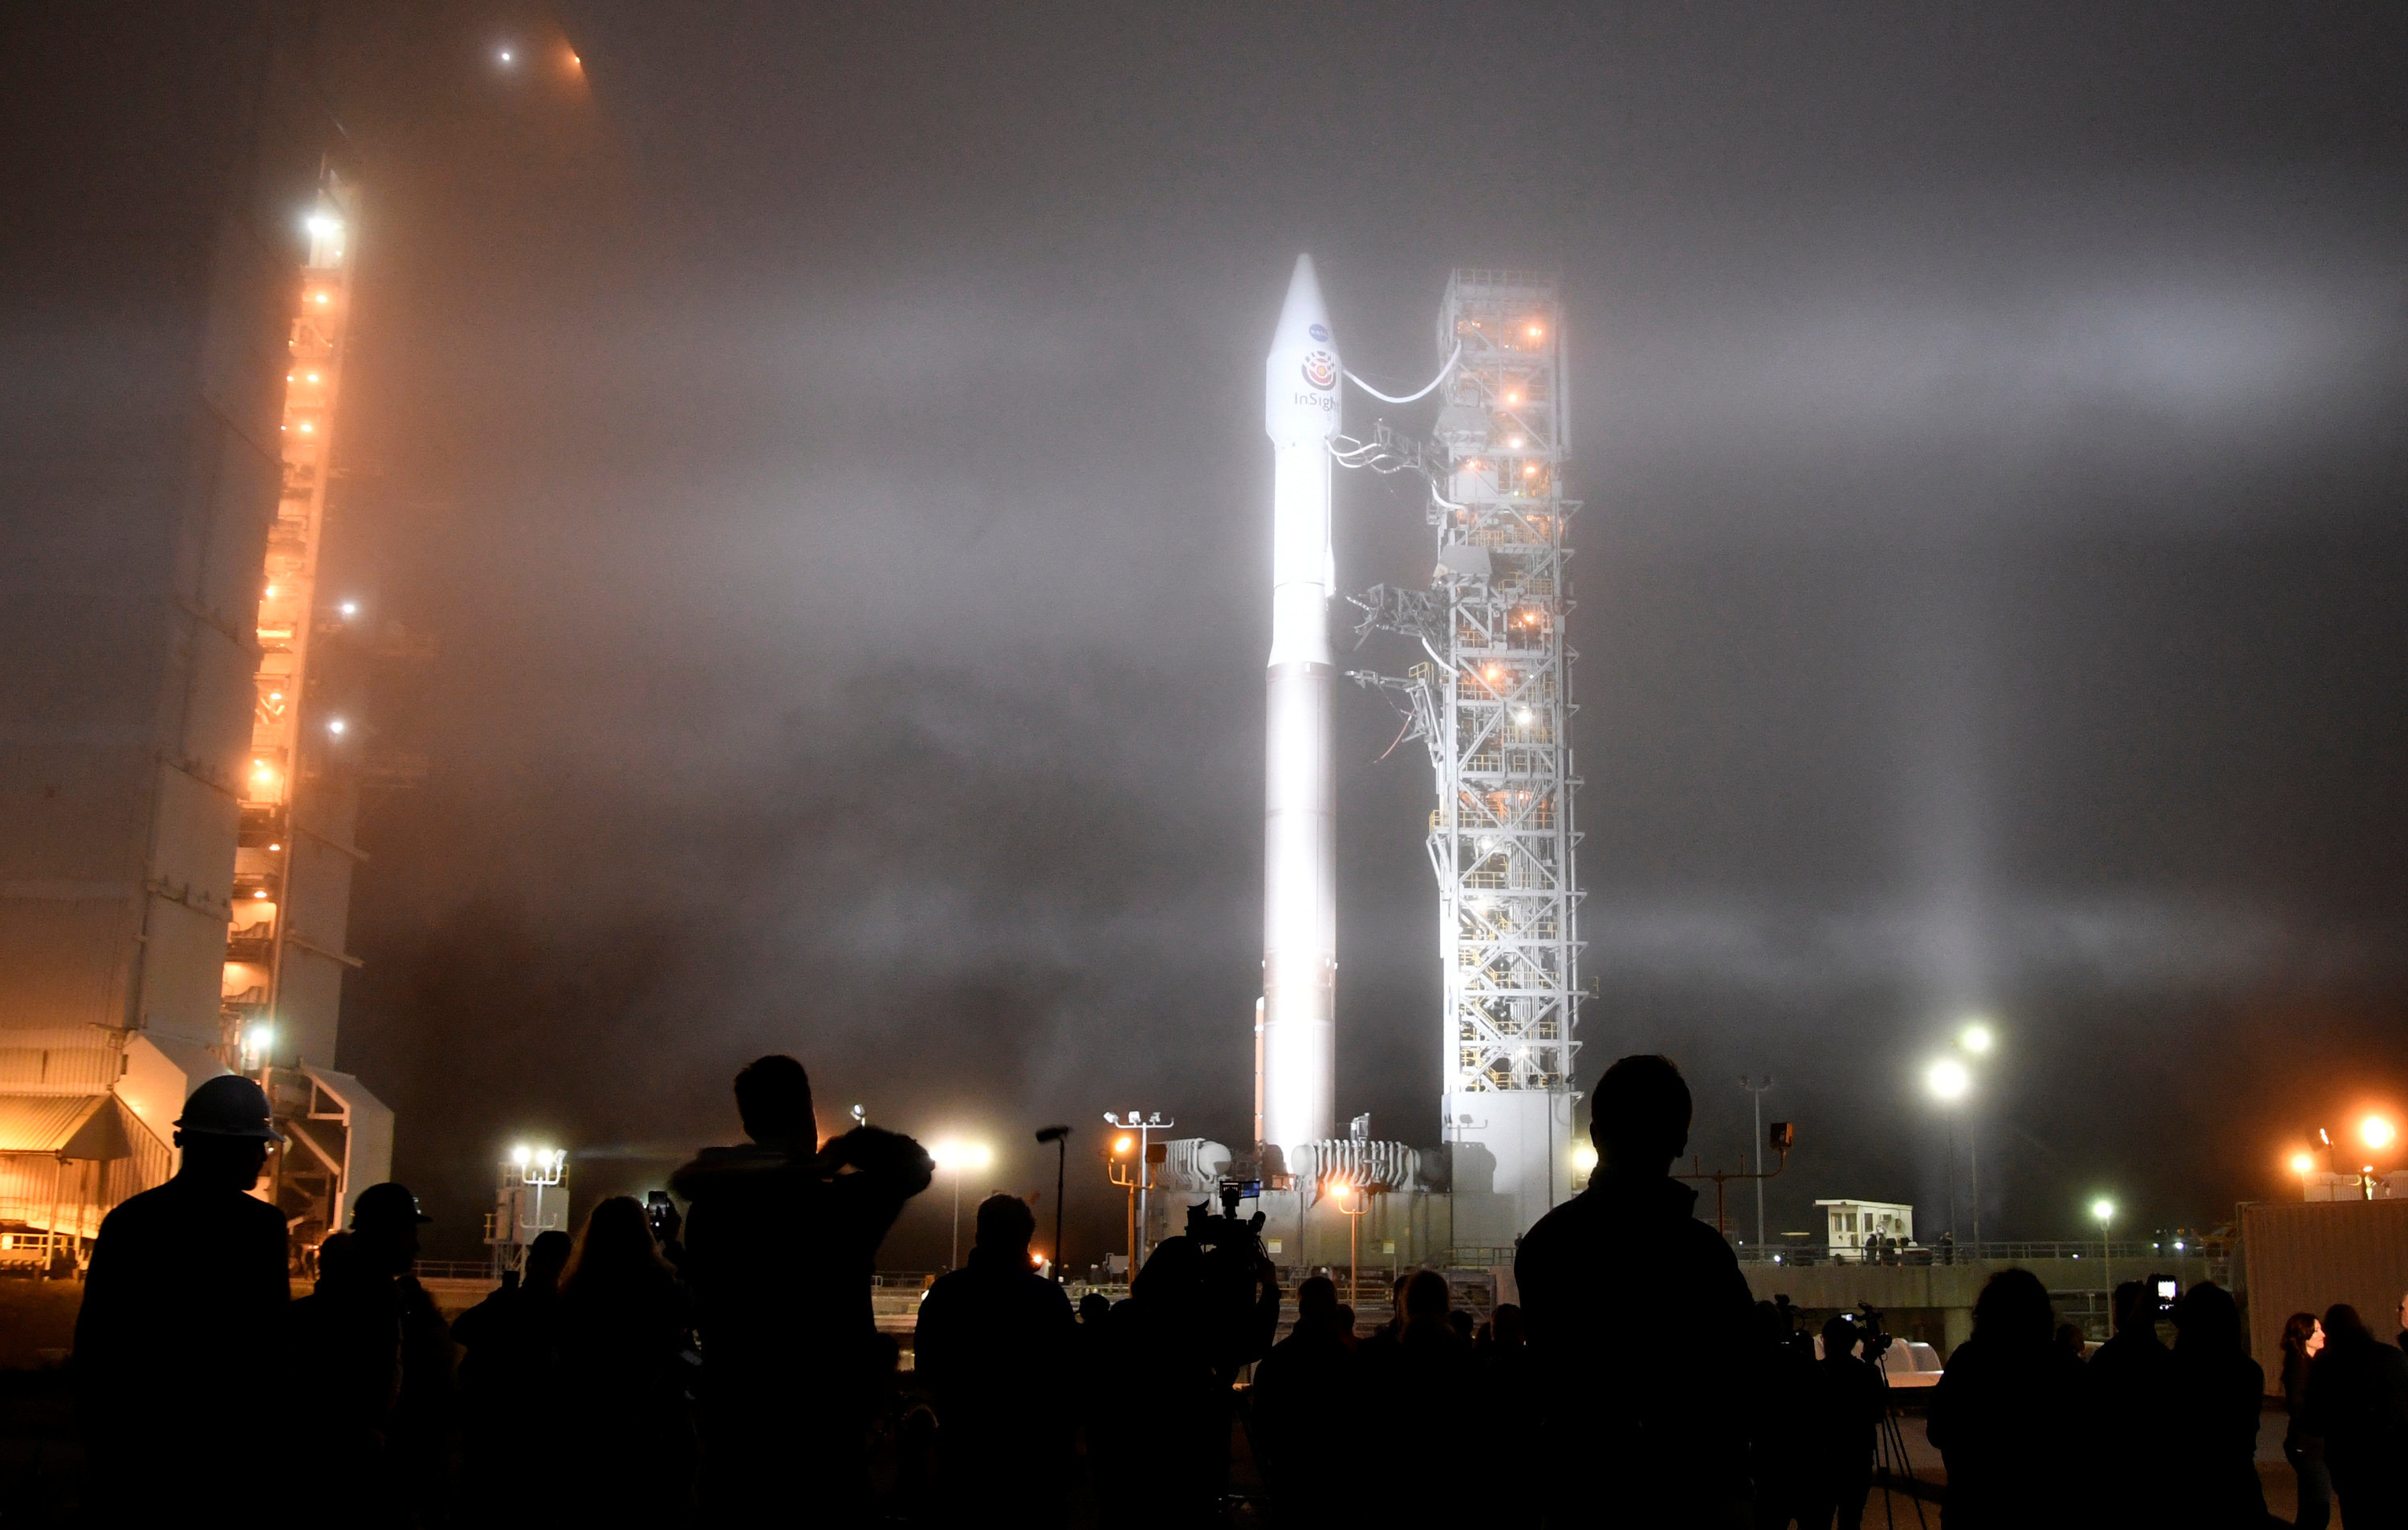 Heavy fog rolls in during tower rollback of a United Launch Alliance Atlas V rocket with InSight Mars lander onboard before lifting off from Vandenberg Air Force base in California